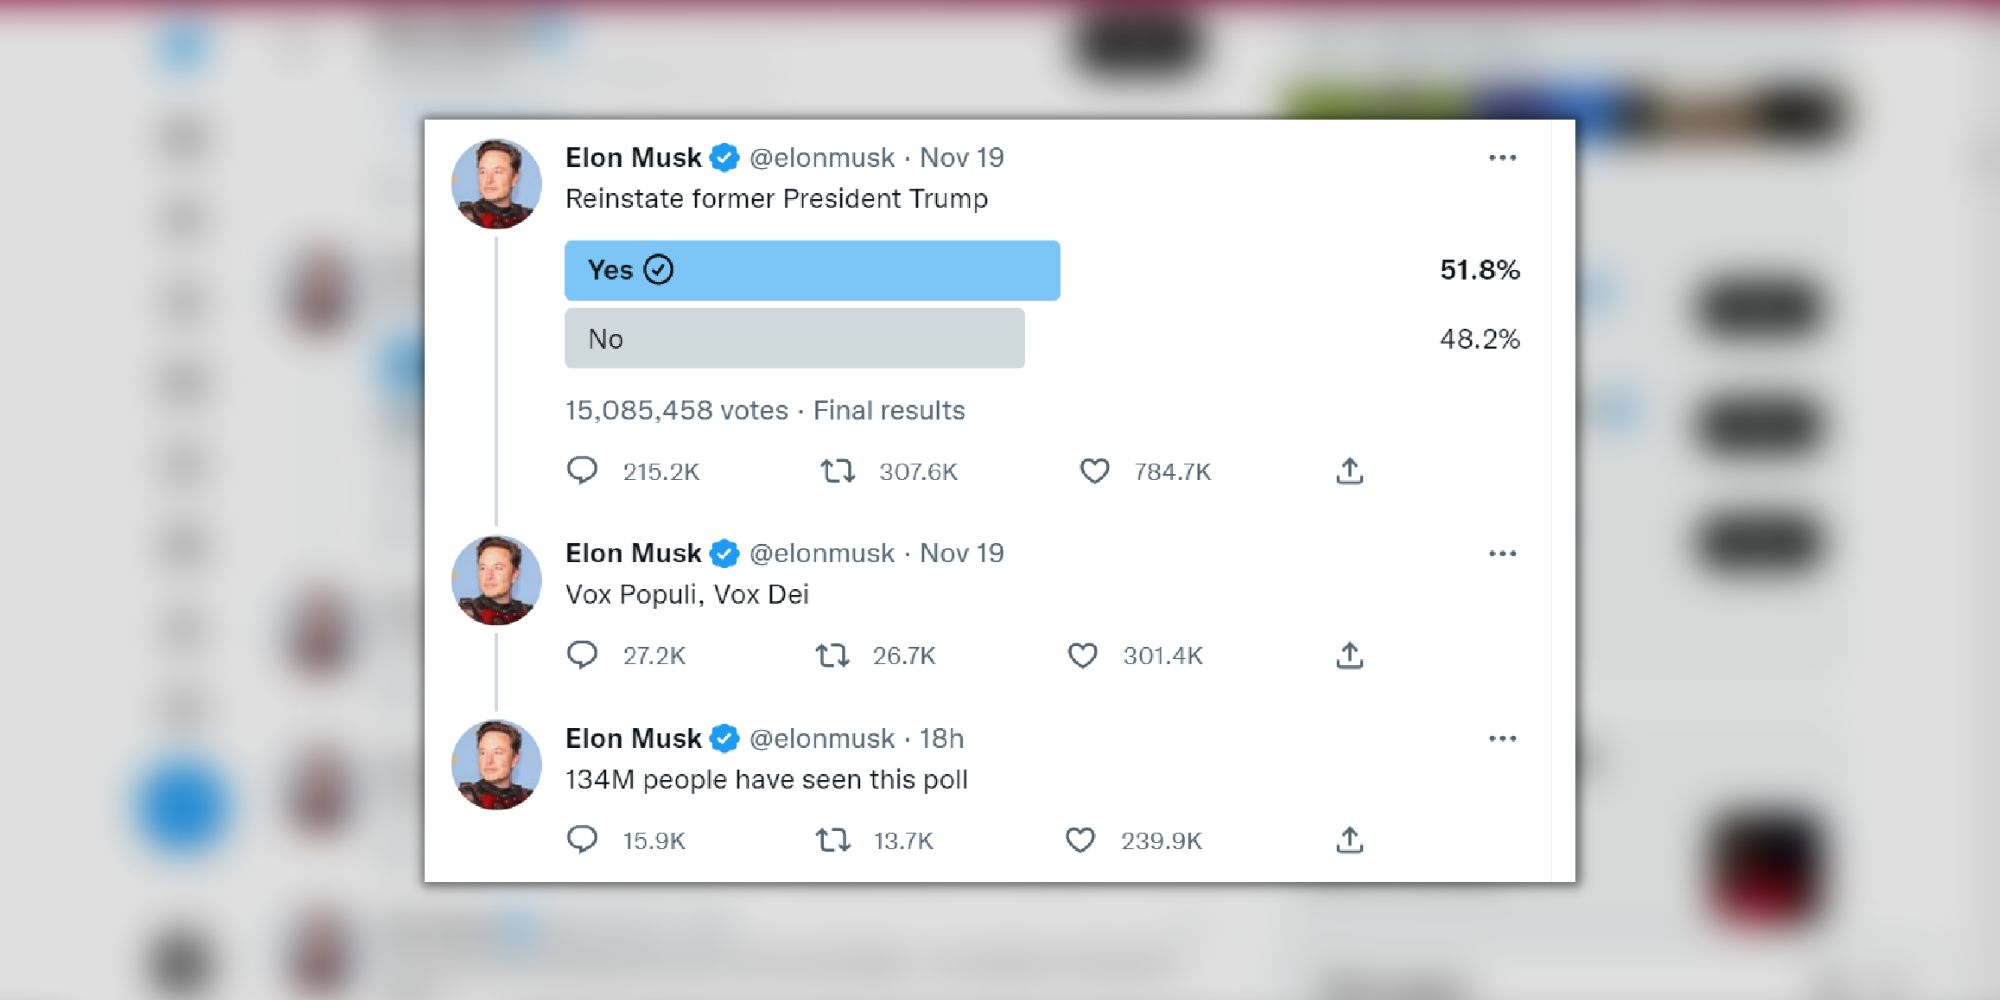 Elon Musk Conducts Poll For Trump's Account